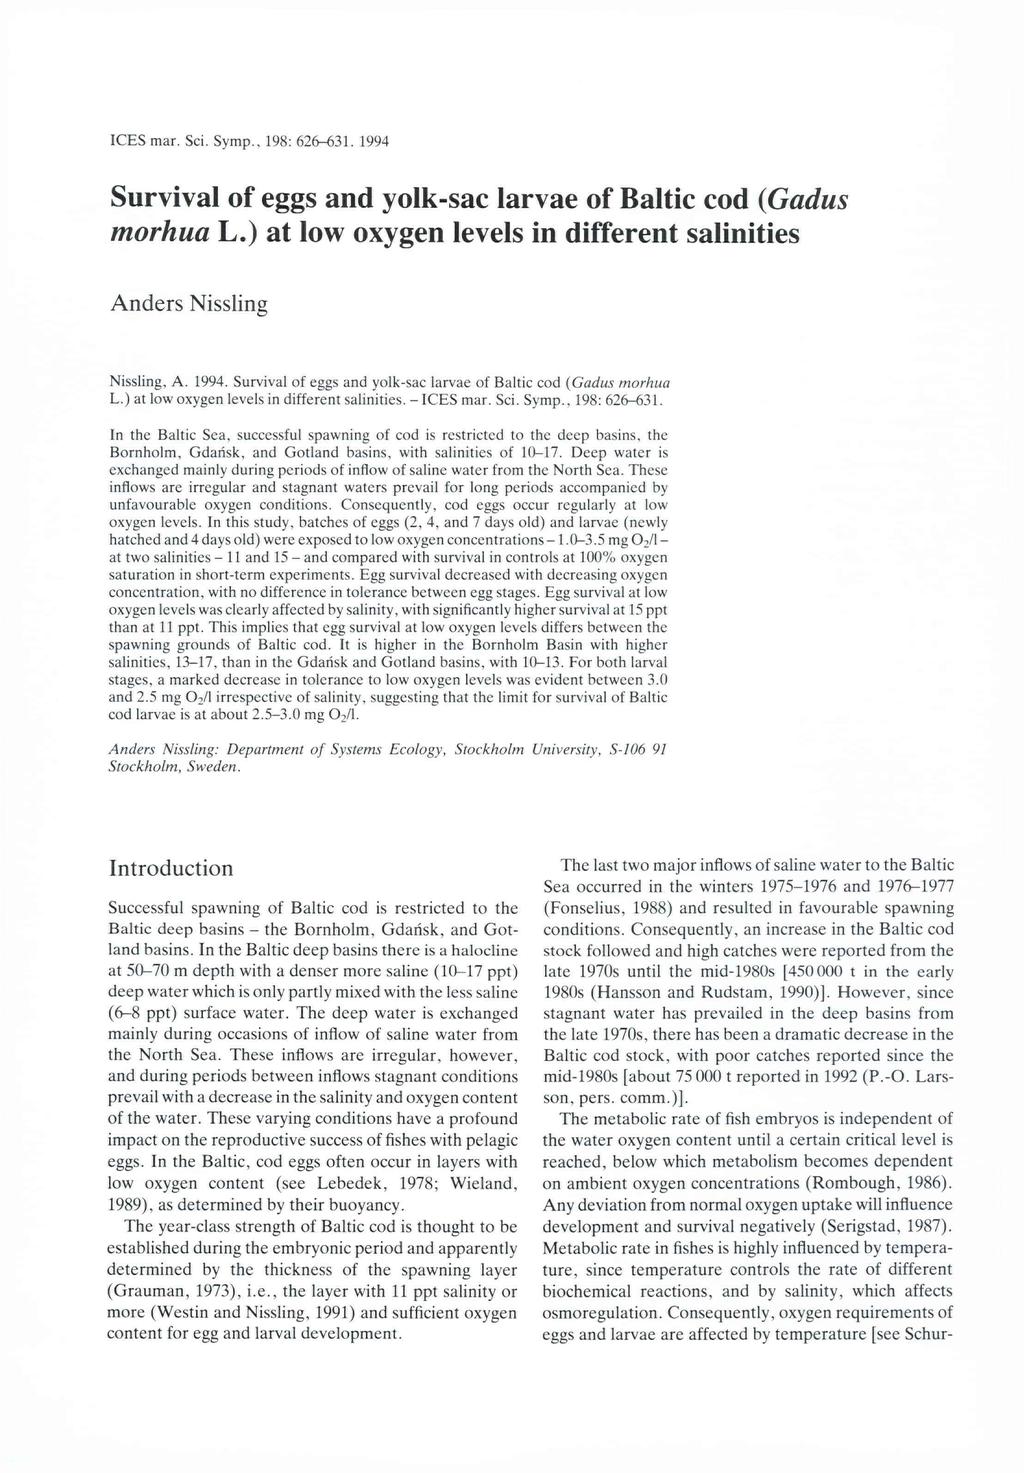 ICES mar. Sei. Symp., 198: 626-631. 1994 Survival of eggs and yolk-sac larvae of Baltic cod (Gadus morhua L.) at low levels in different salinities Anders Nissling Nissling, A. 1994. Survival of eggs and yolk-sac larvae of Baltic cod (Gadus morhua L.) at low levels in different salinities. - ICES mar.